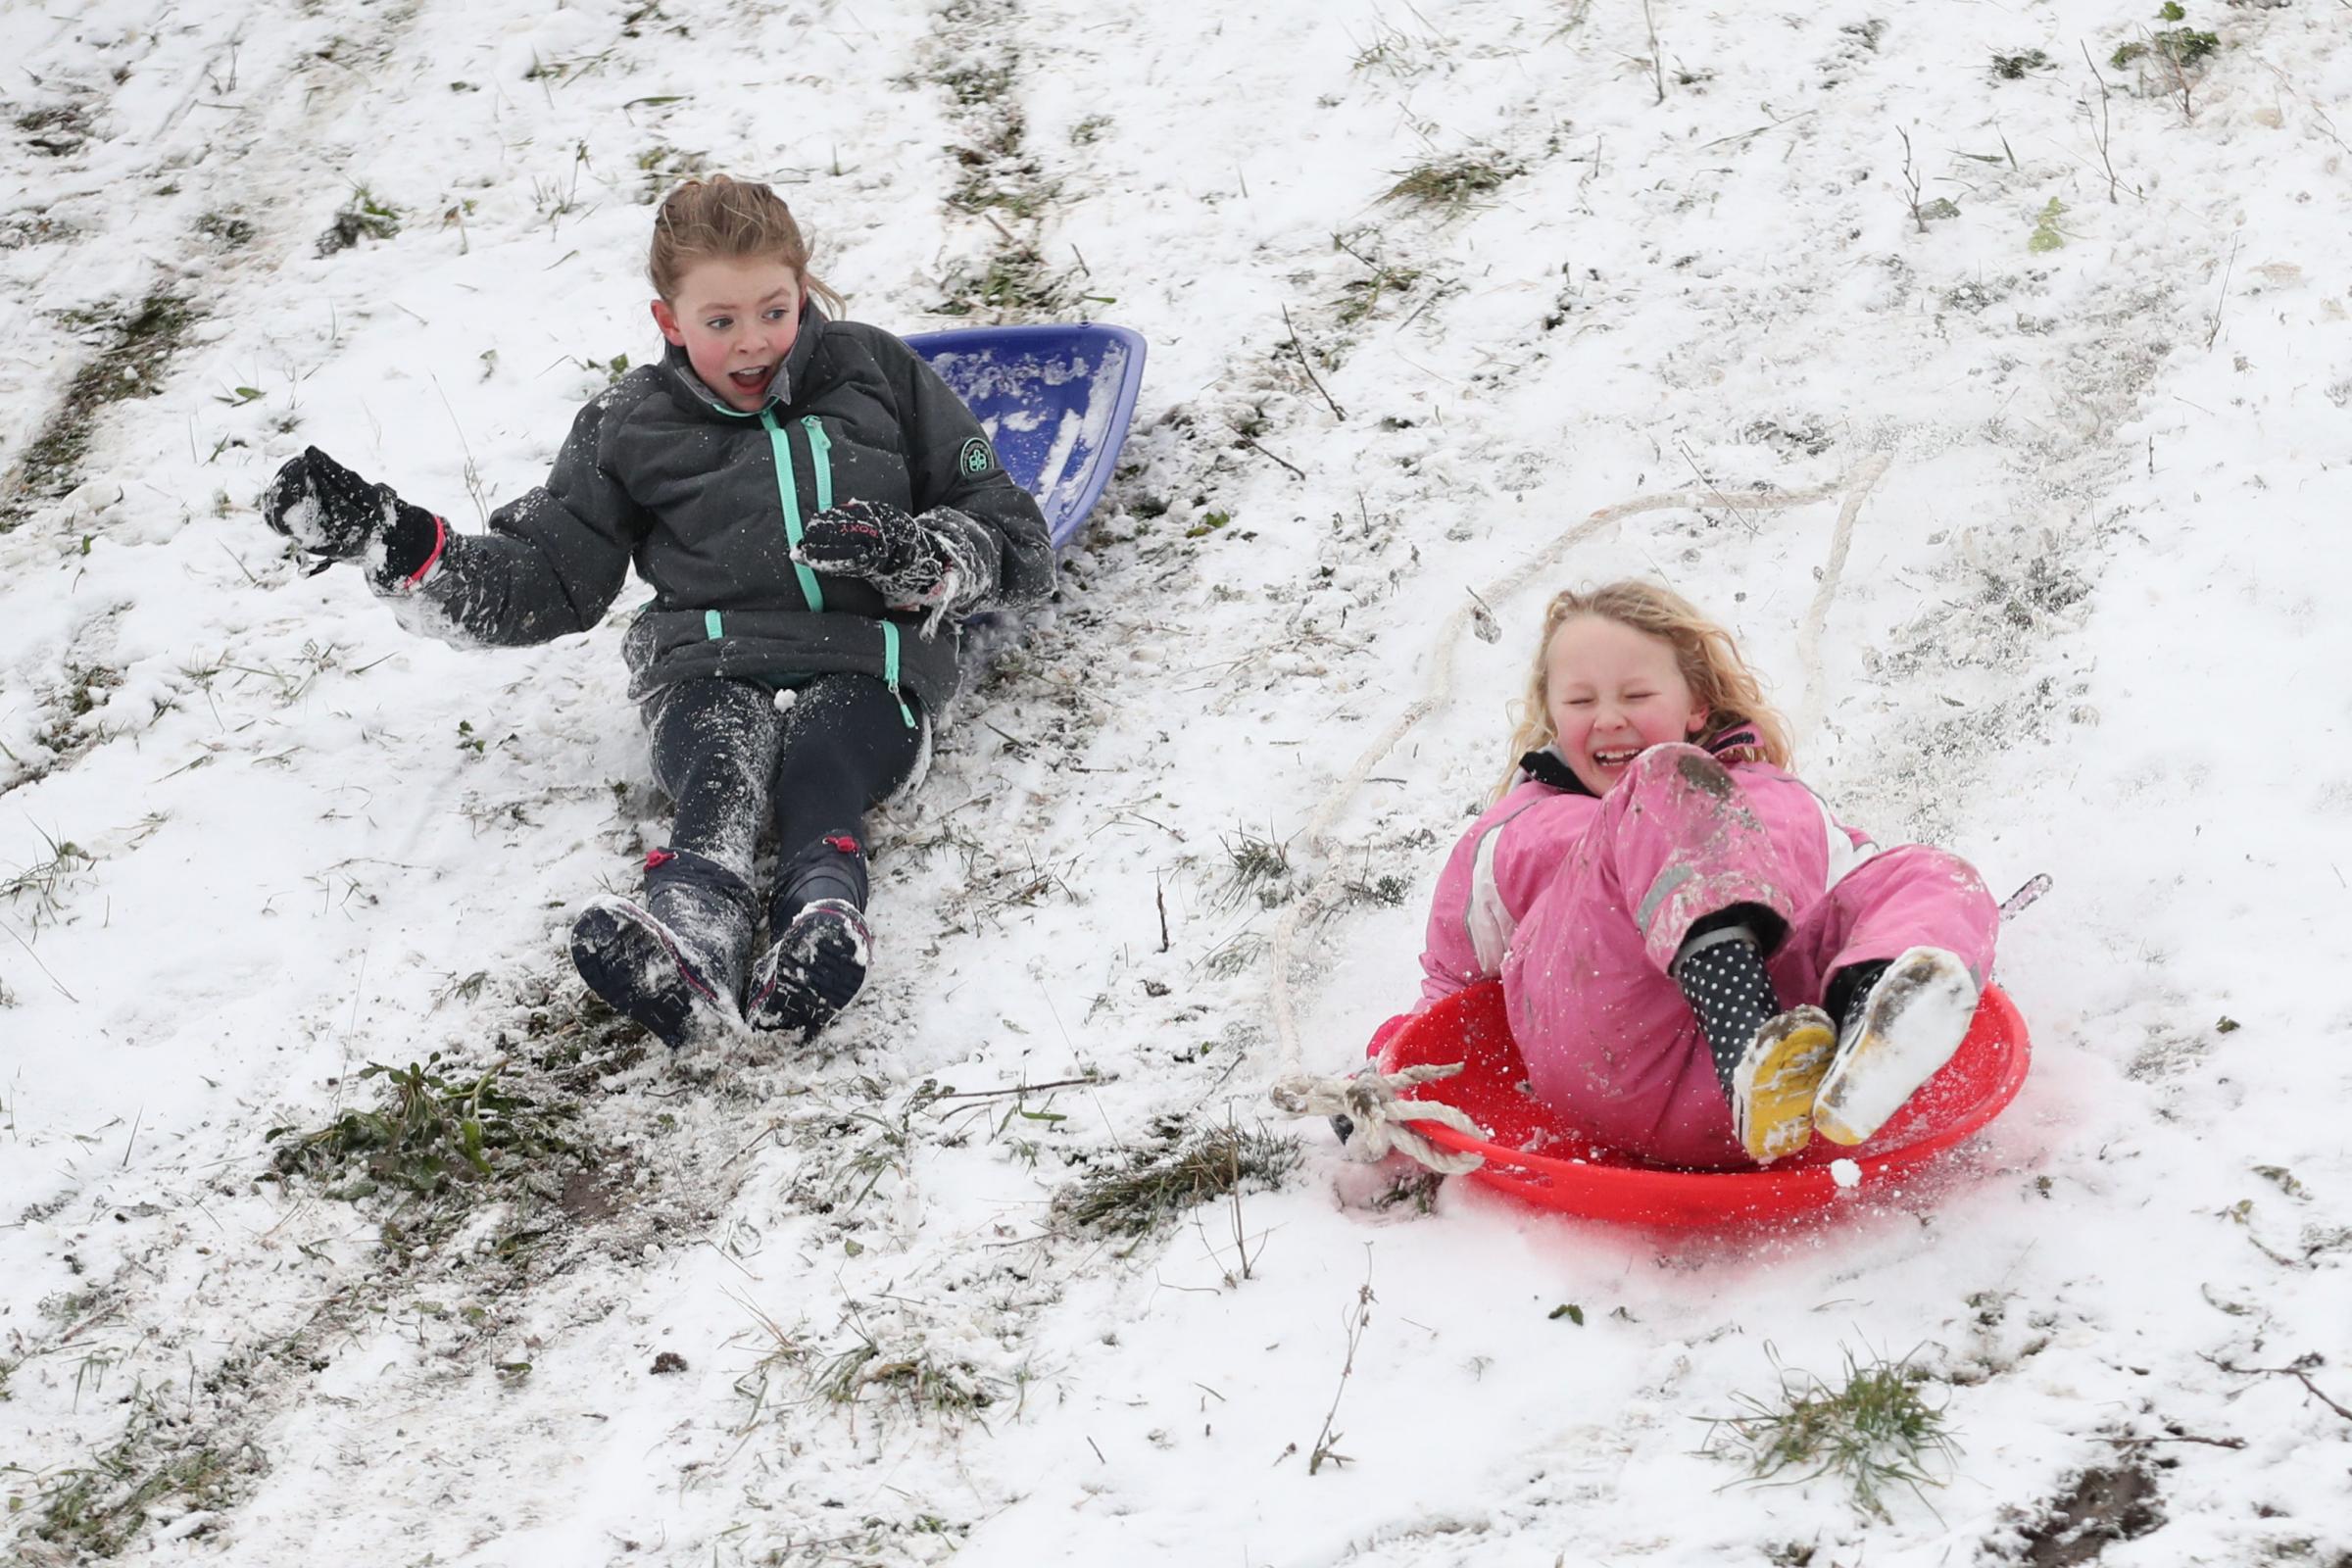 Amy Heather, aged 10 (left) and Betty Smith, aged 7, sledging near the seafront at Southend. Picture: Yui Mok/PA Wire